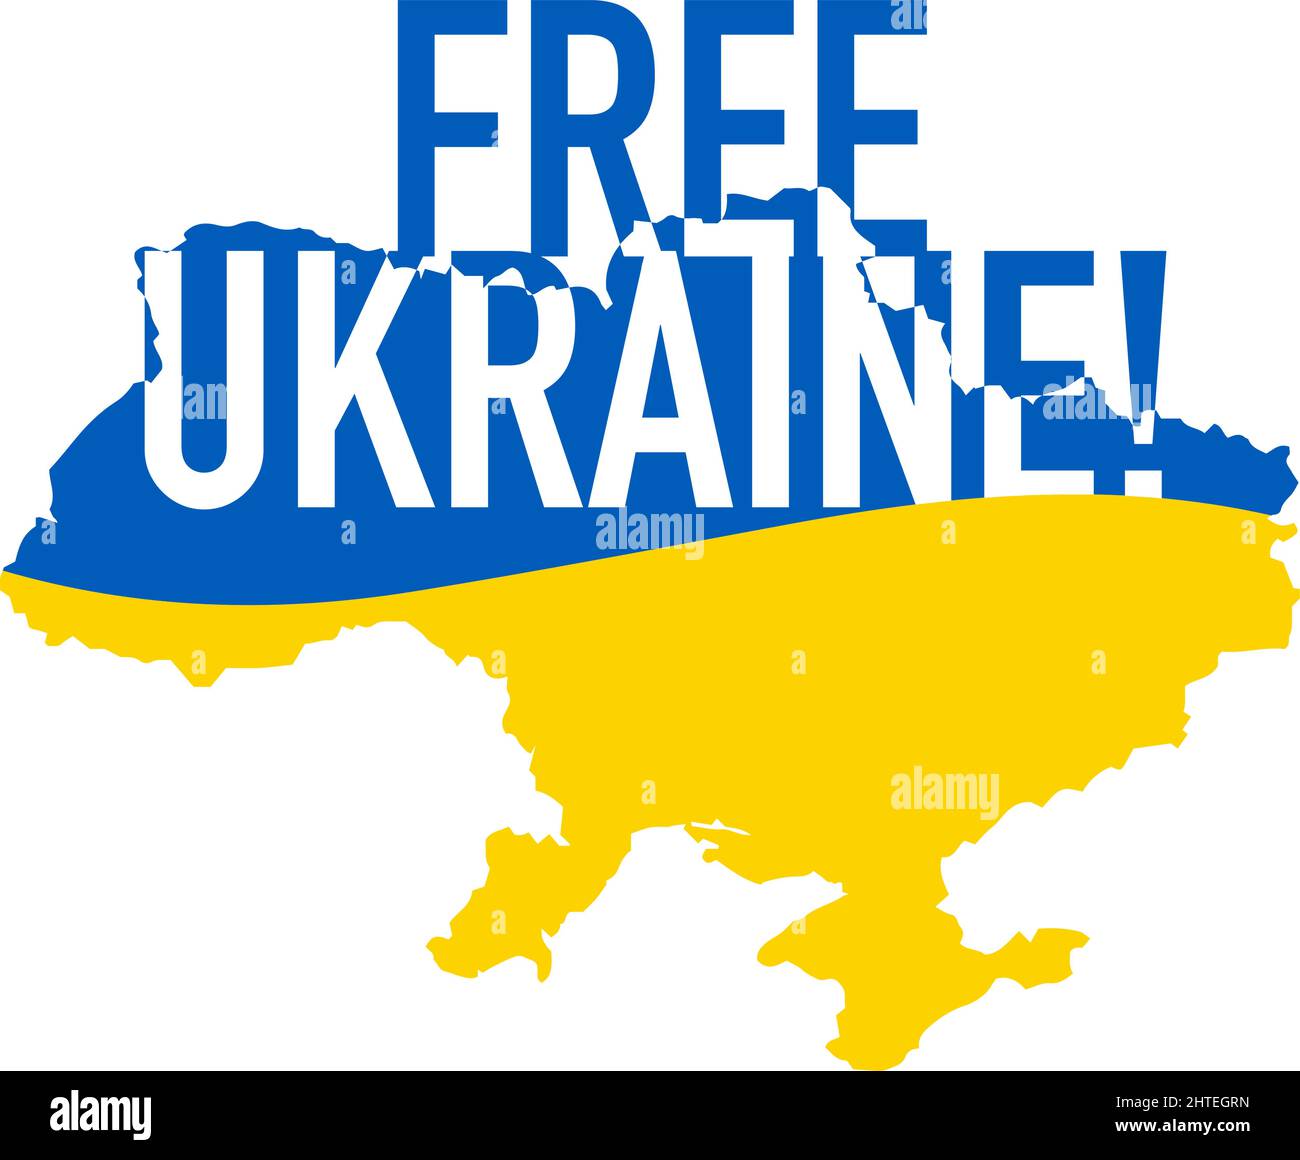 Free Ukraine Lettering on blue yellow map icon. Support icon for Kyiv and Ukraine people. Stay Strong together. Patriotic symbol, icon.-SupplementalCa Stock Vector